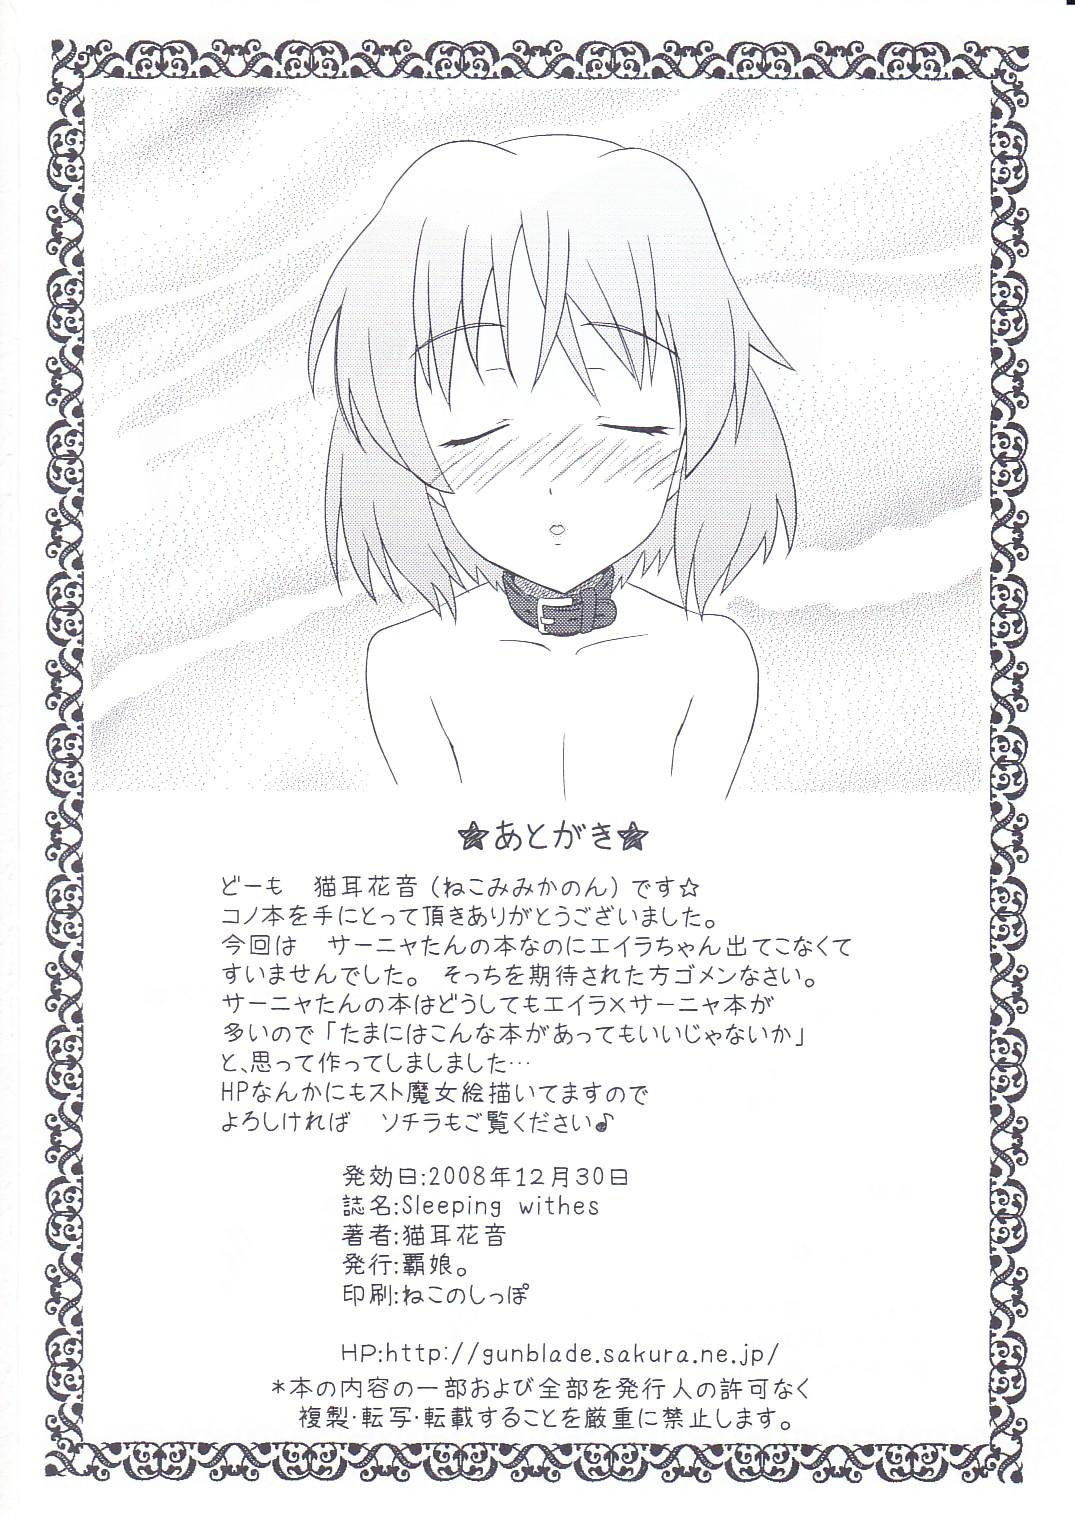 Skype Sleeping witches - Strike witches Outside - Page 33